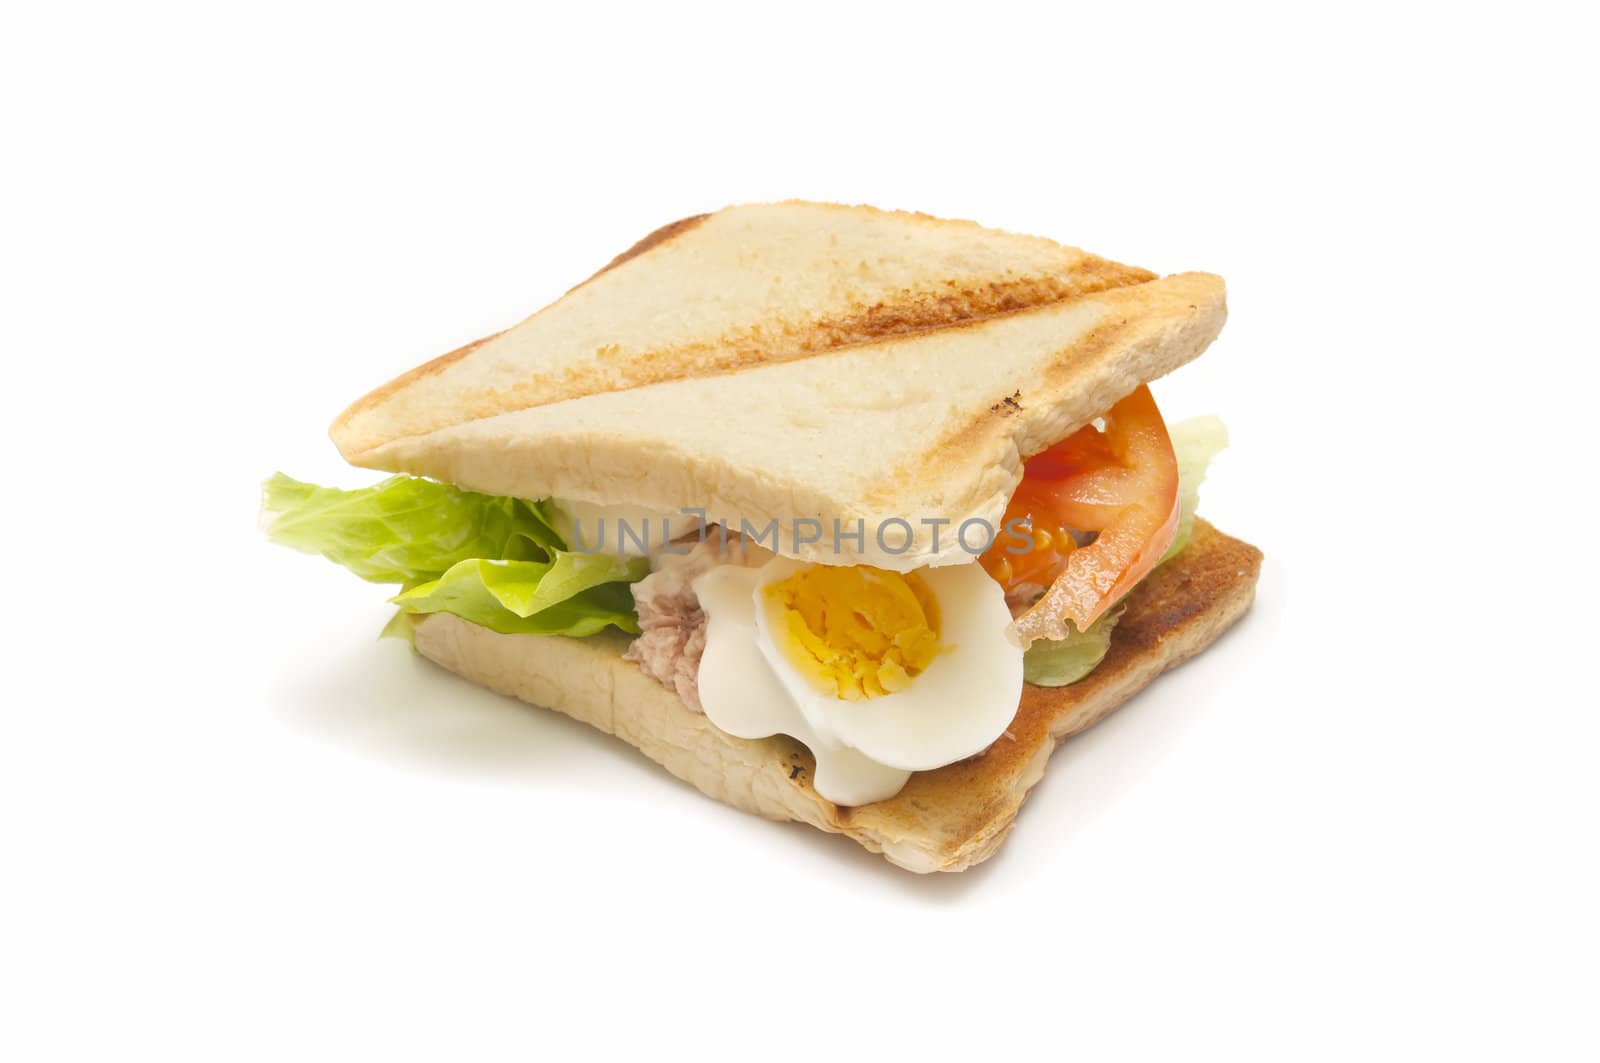 vegetable sandwich with tuna, tomato, lettuce and egg isolated on white background

 